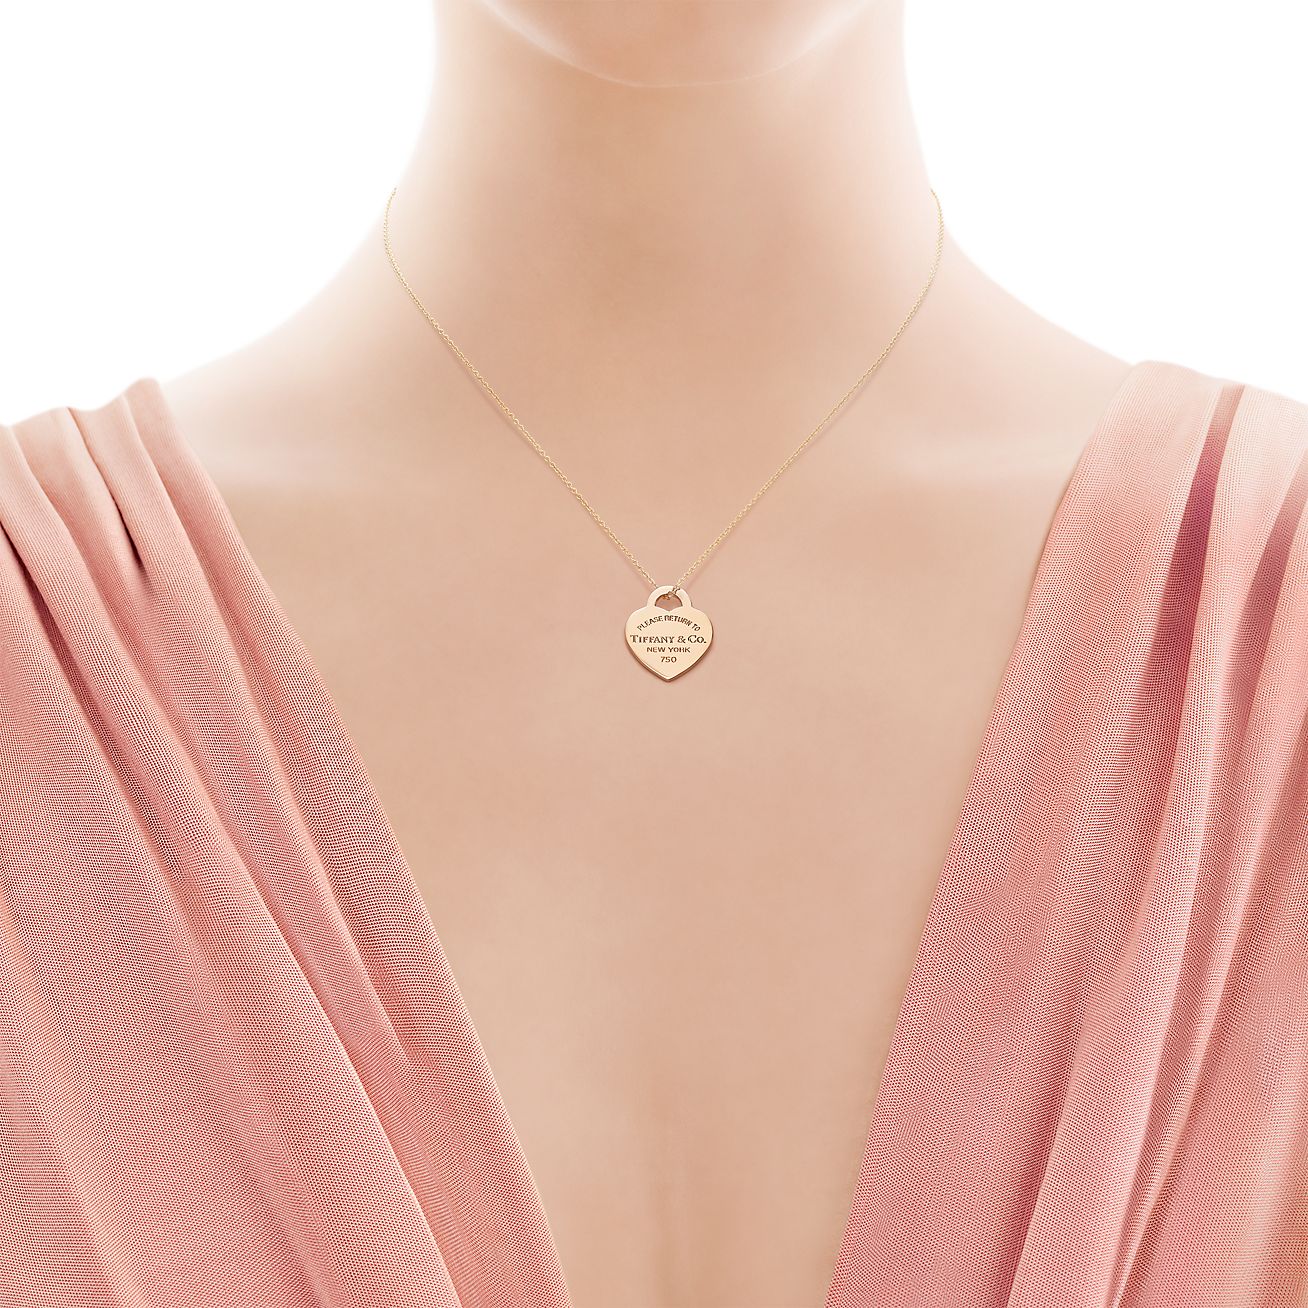 return to tiffany blue heart necklace